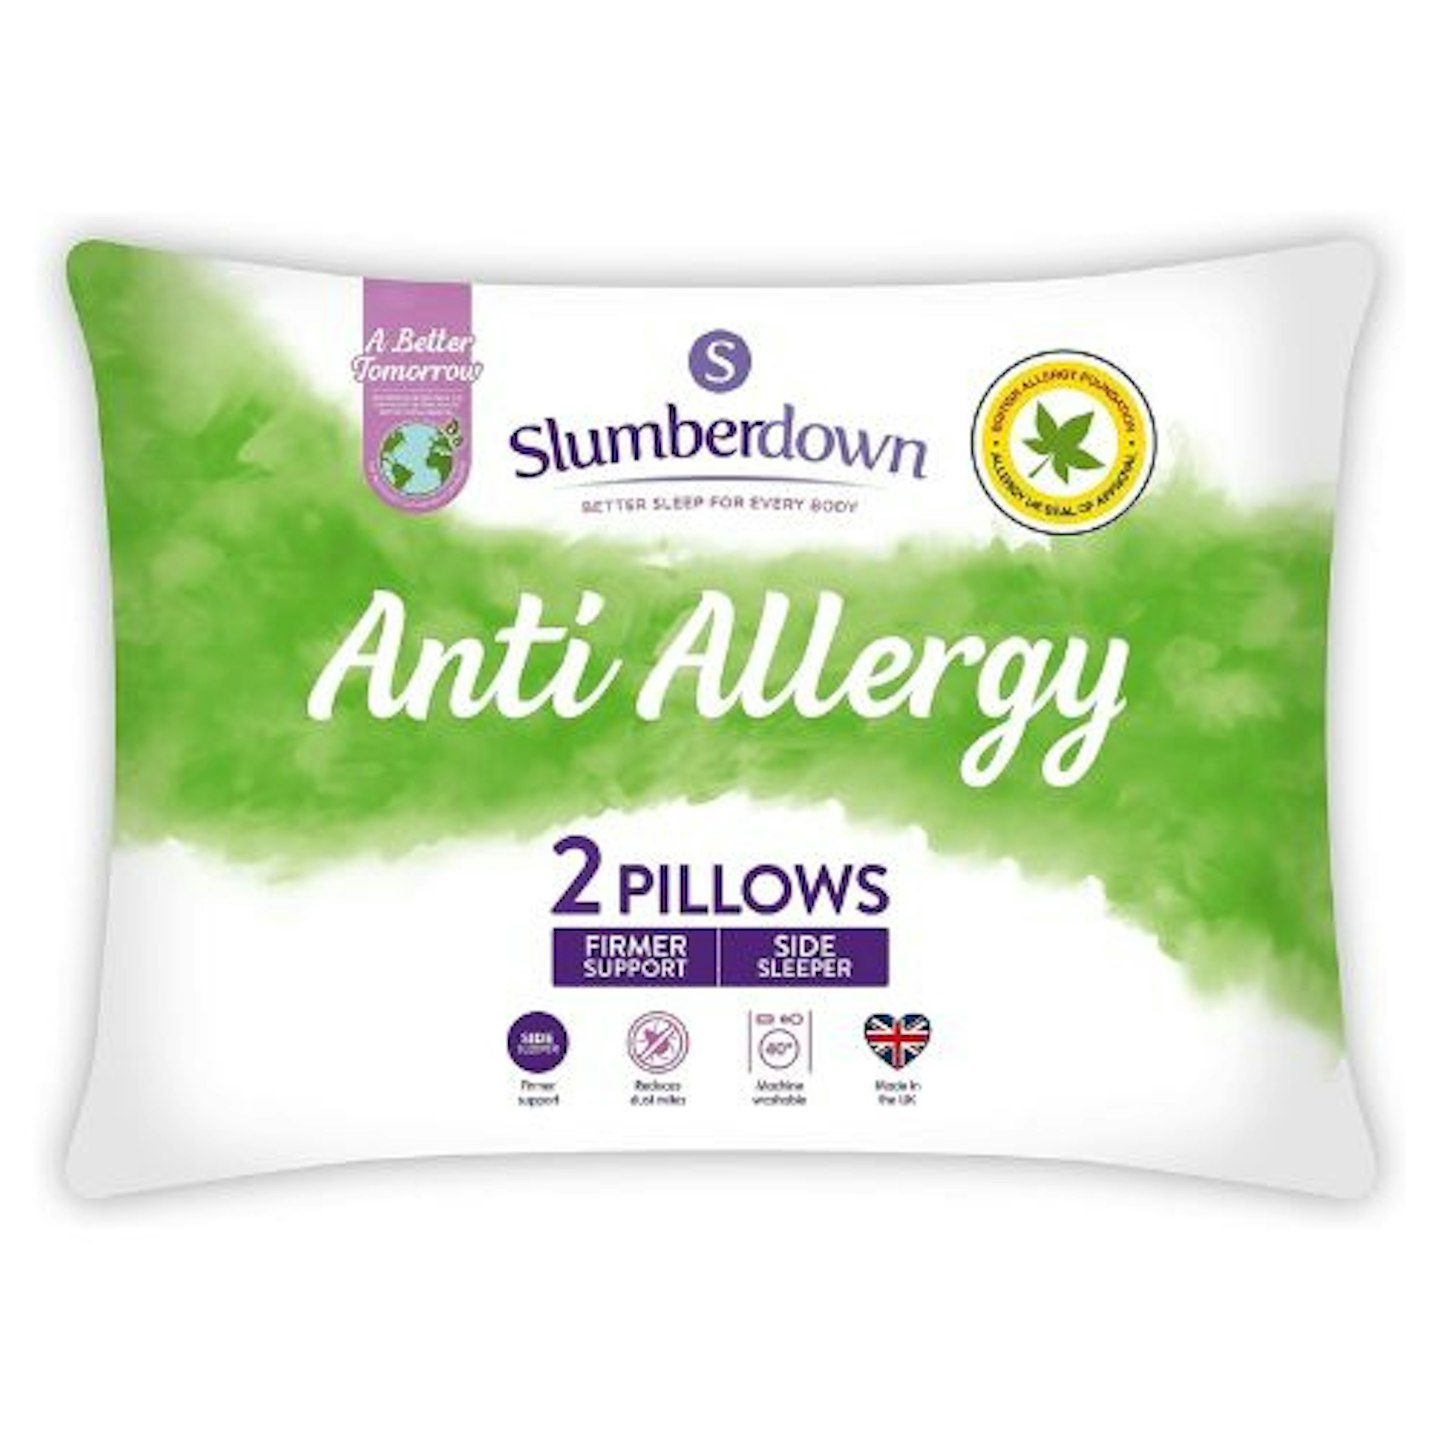 Slumberdown Anti Allergy Pillows 2 Pack - Soft Support Front Sleeper Pillows for Neck Pain Relief - Anti Bacterial, Comfortable, Hypoallergenic, UK Standard...